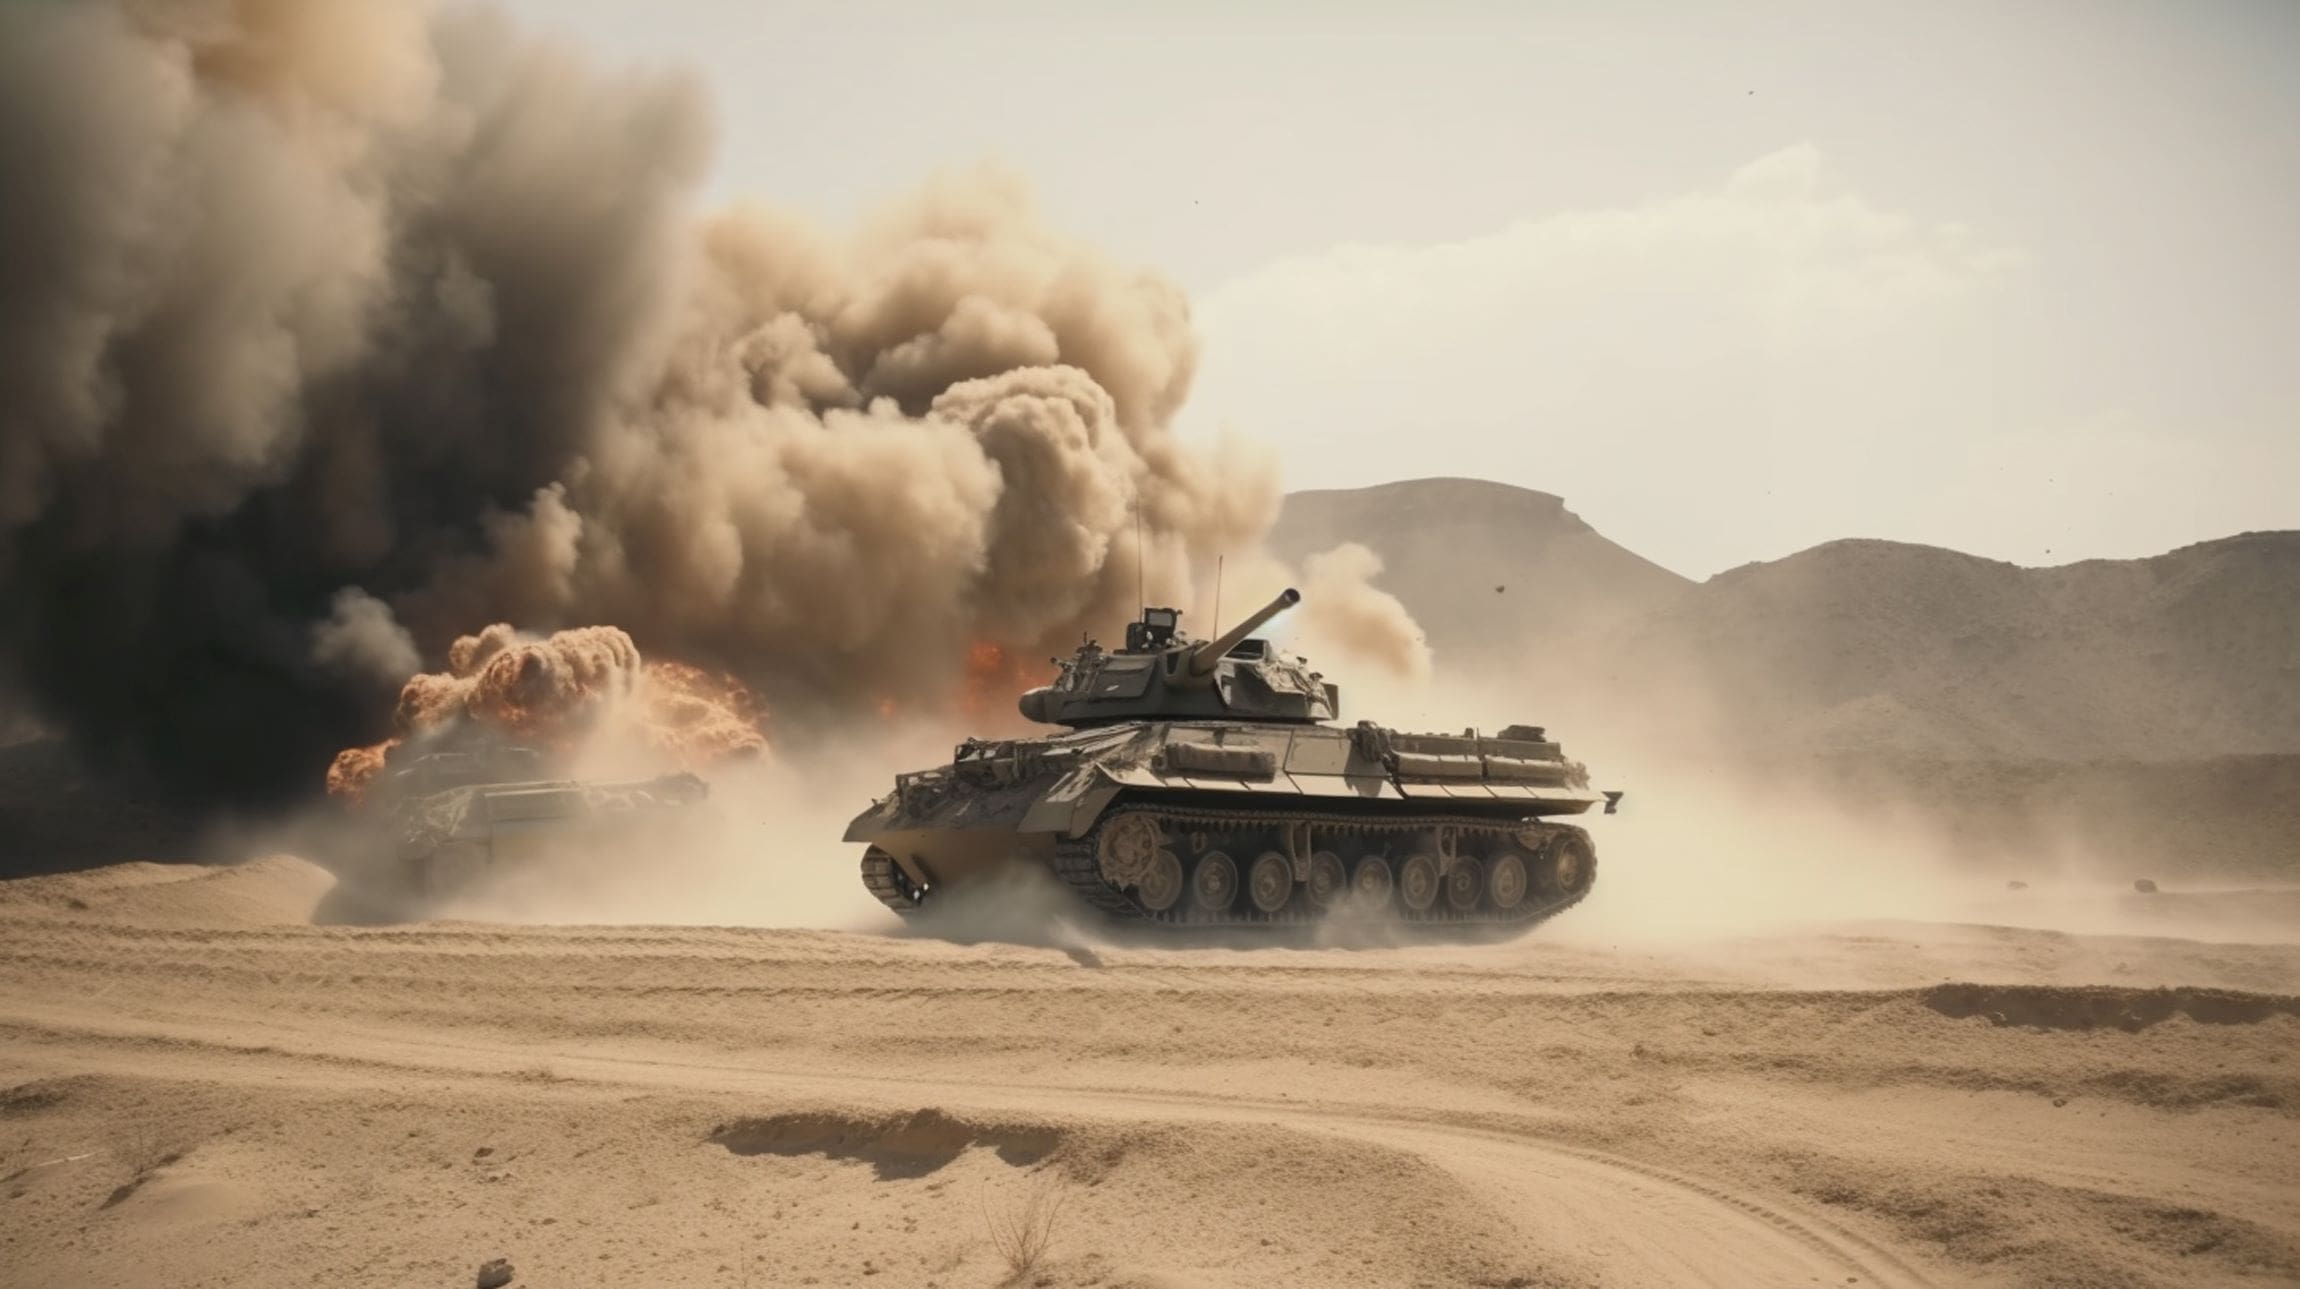 Armored vehicles advancing in a desert environment with explosions in the background.